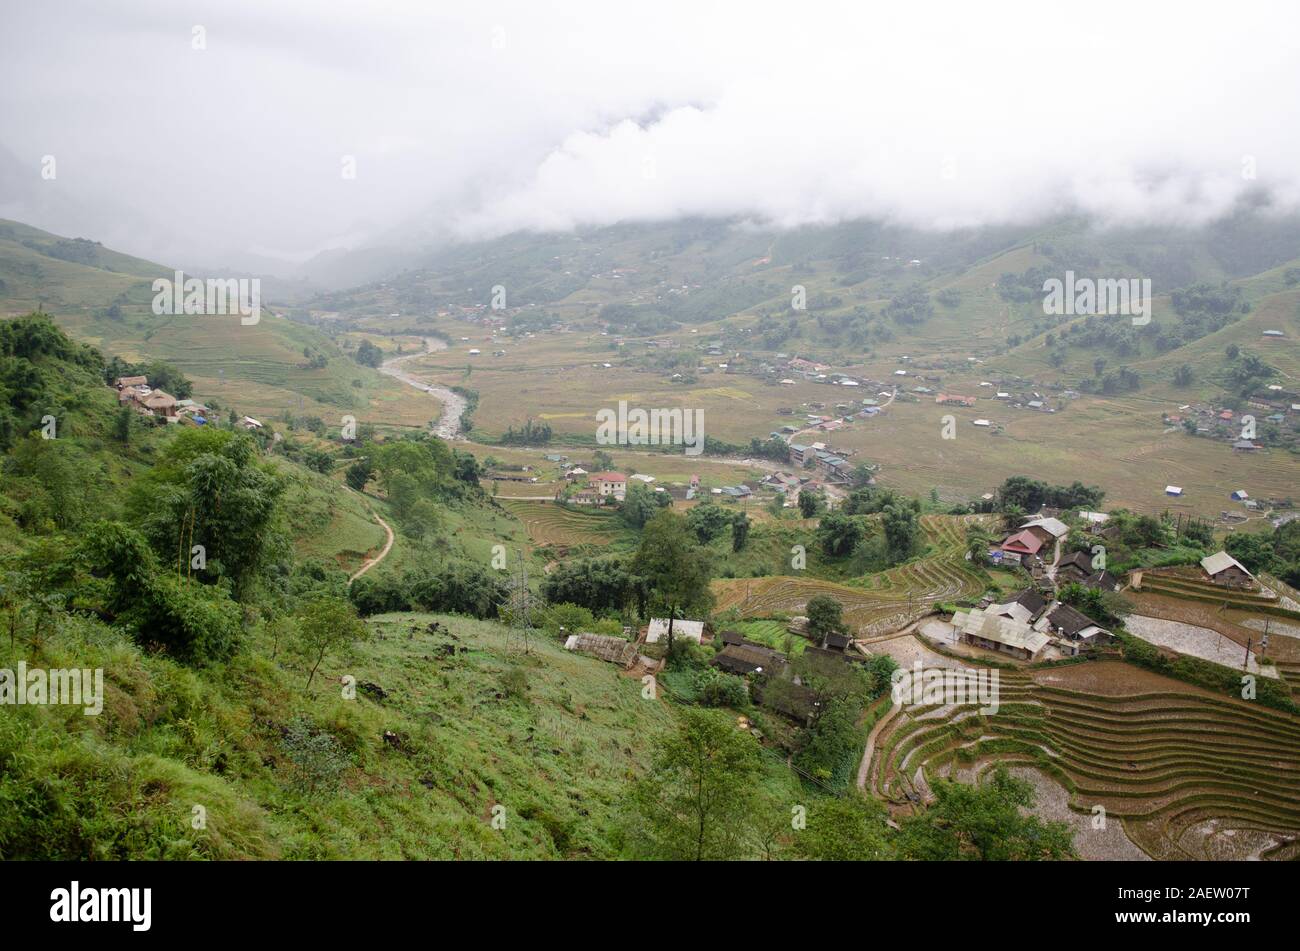 A landscape view of a valley with rice terraces and homes in Sapa, Lao Cai, Vietnam Stock Photo